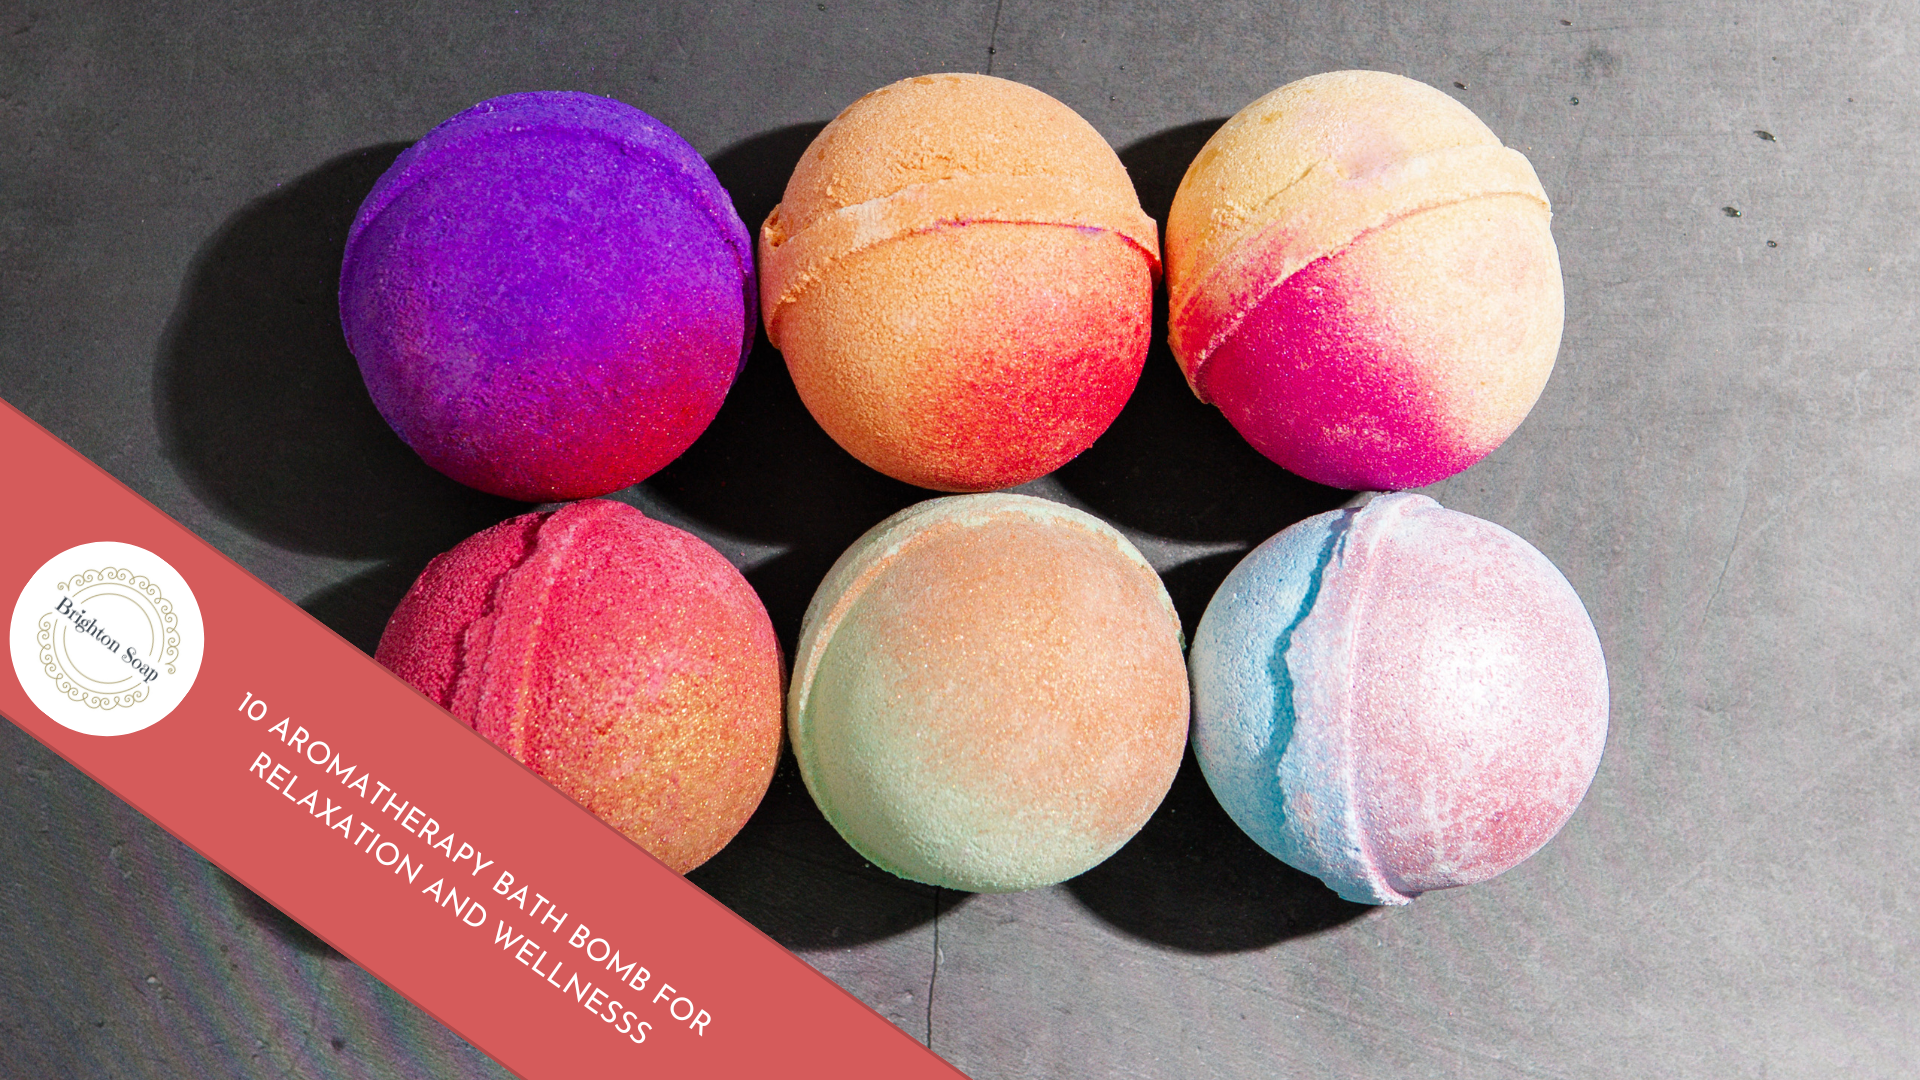 10 Aromatherapy Bath Bomb for Relaxation and Wellness